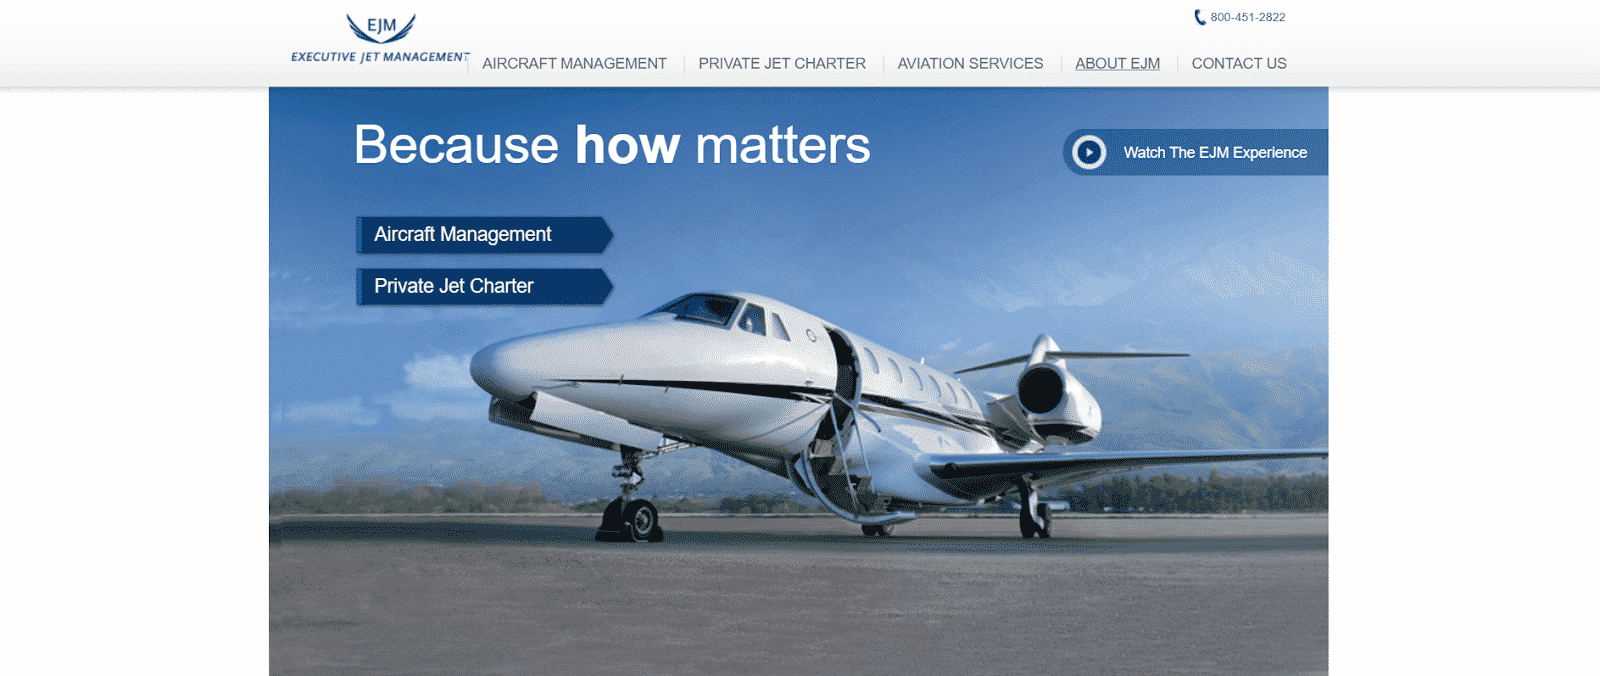 The Executive Jet Management homepage